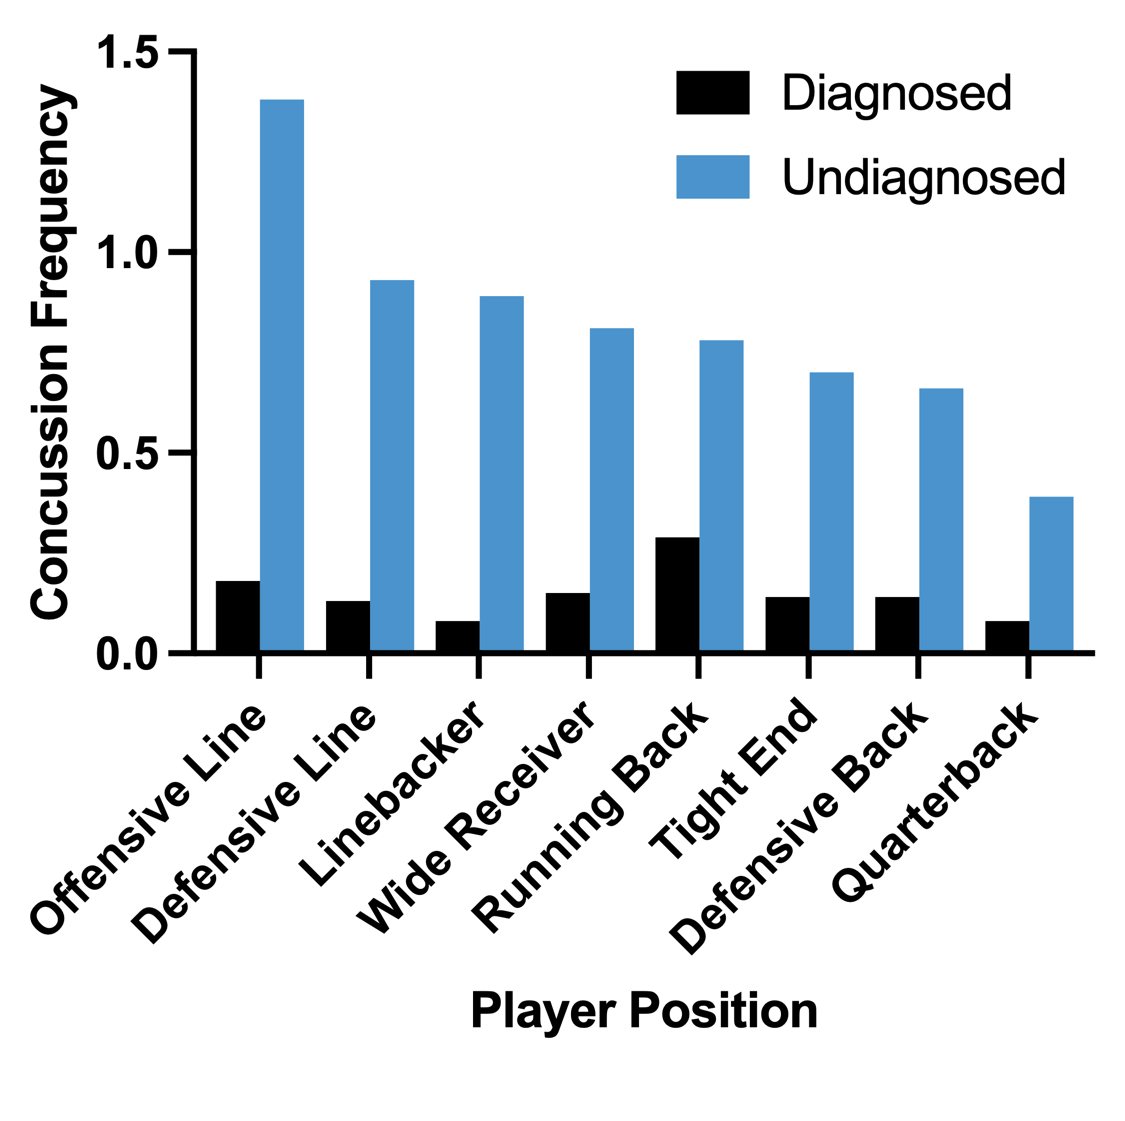 Bar graph of concussion frequency by player position, showing diagnosed cases in black and undiagnosed cases in blue.